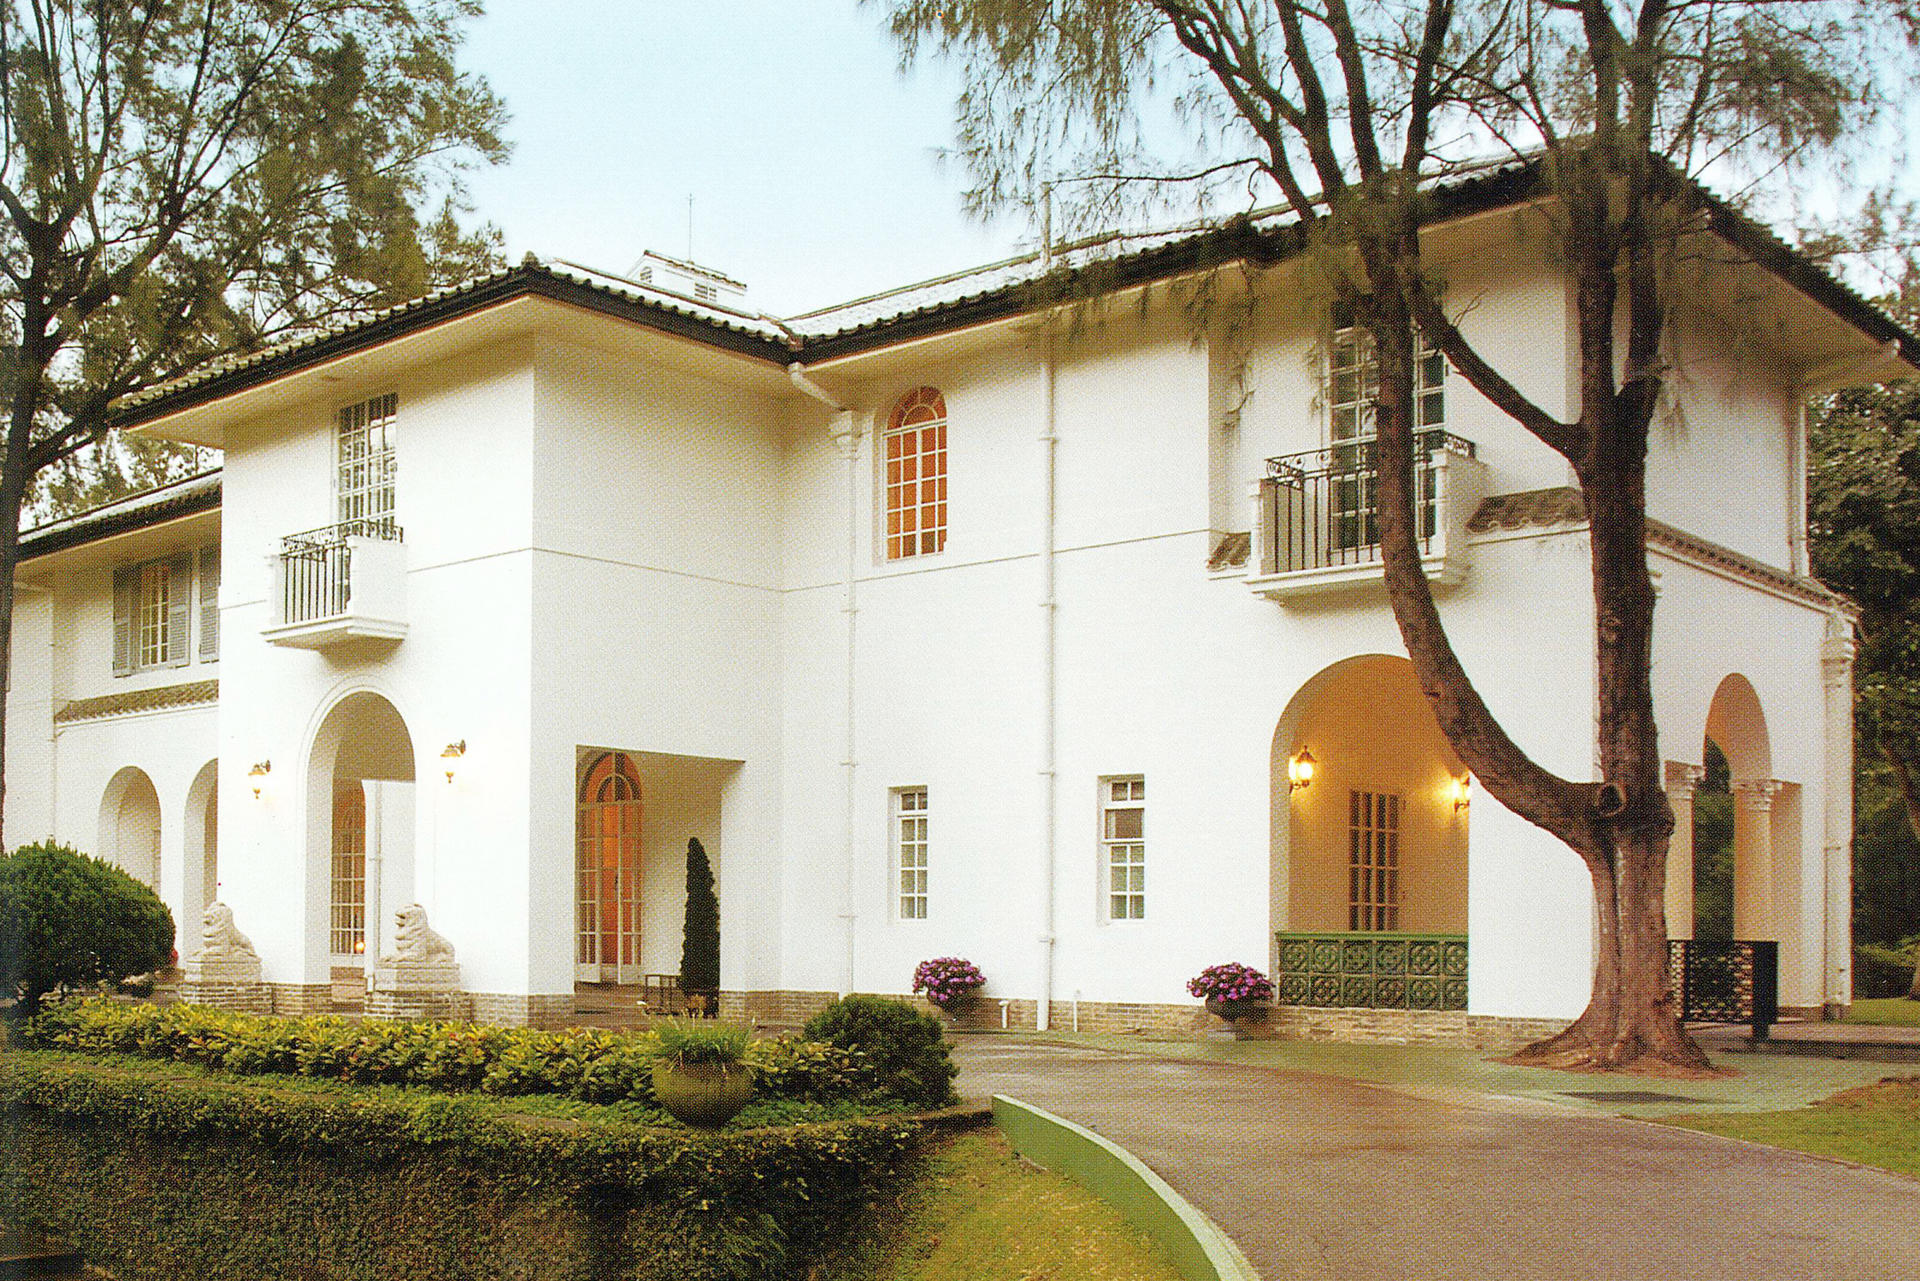 Fanling Lodge was built as a summer home for colonial governors in 1934 and is now used by the chief executive. Photo: SCMP Pictures